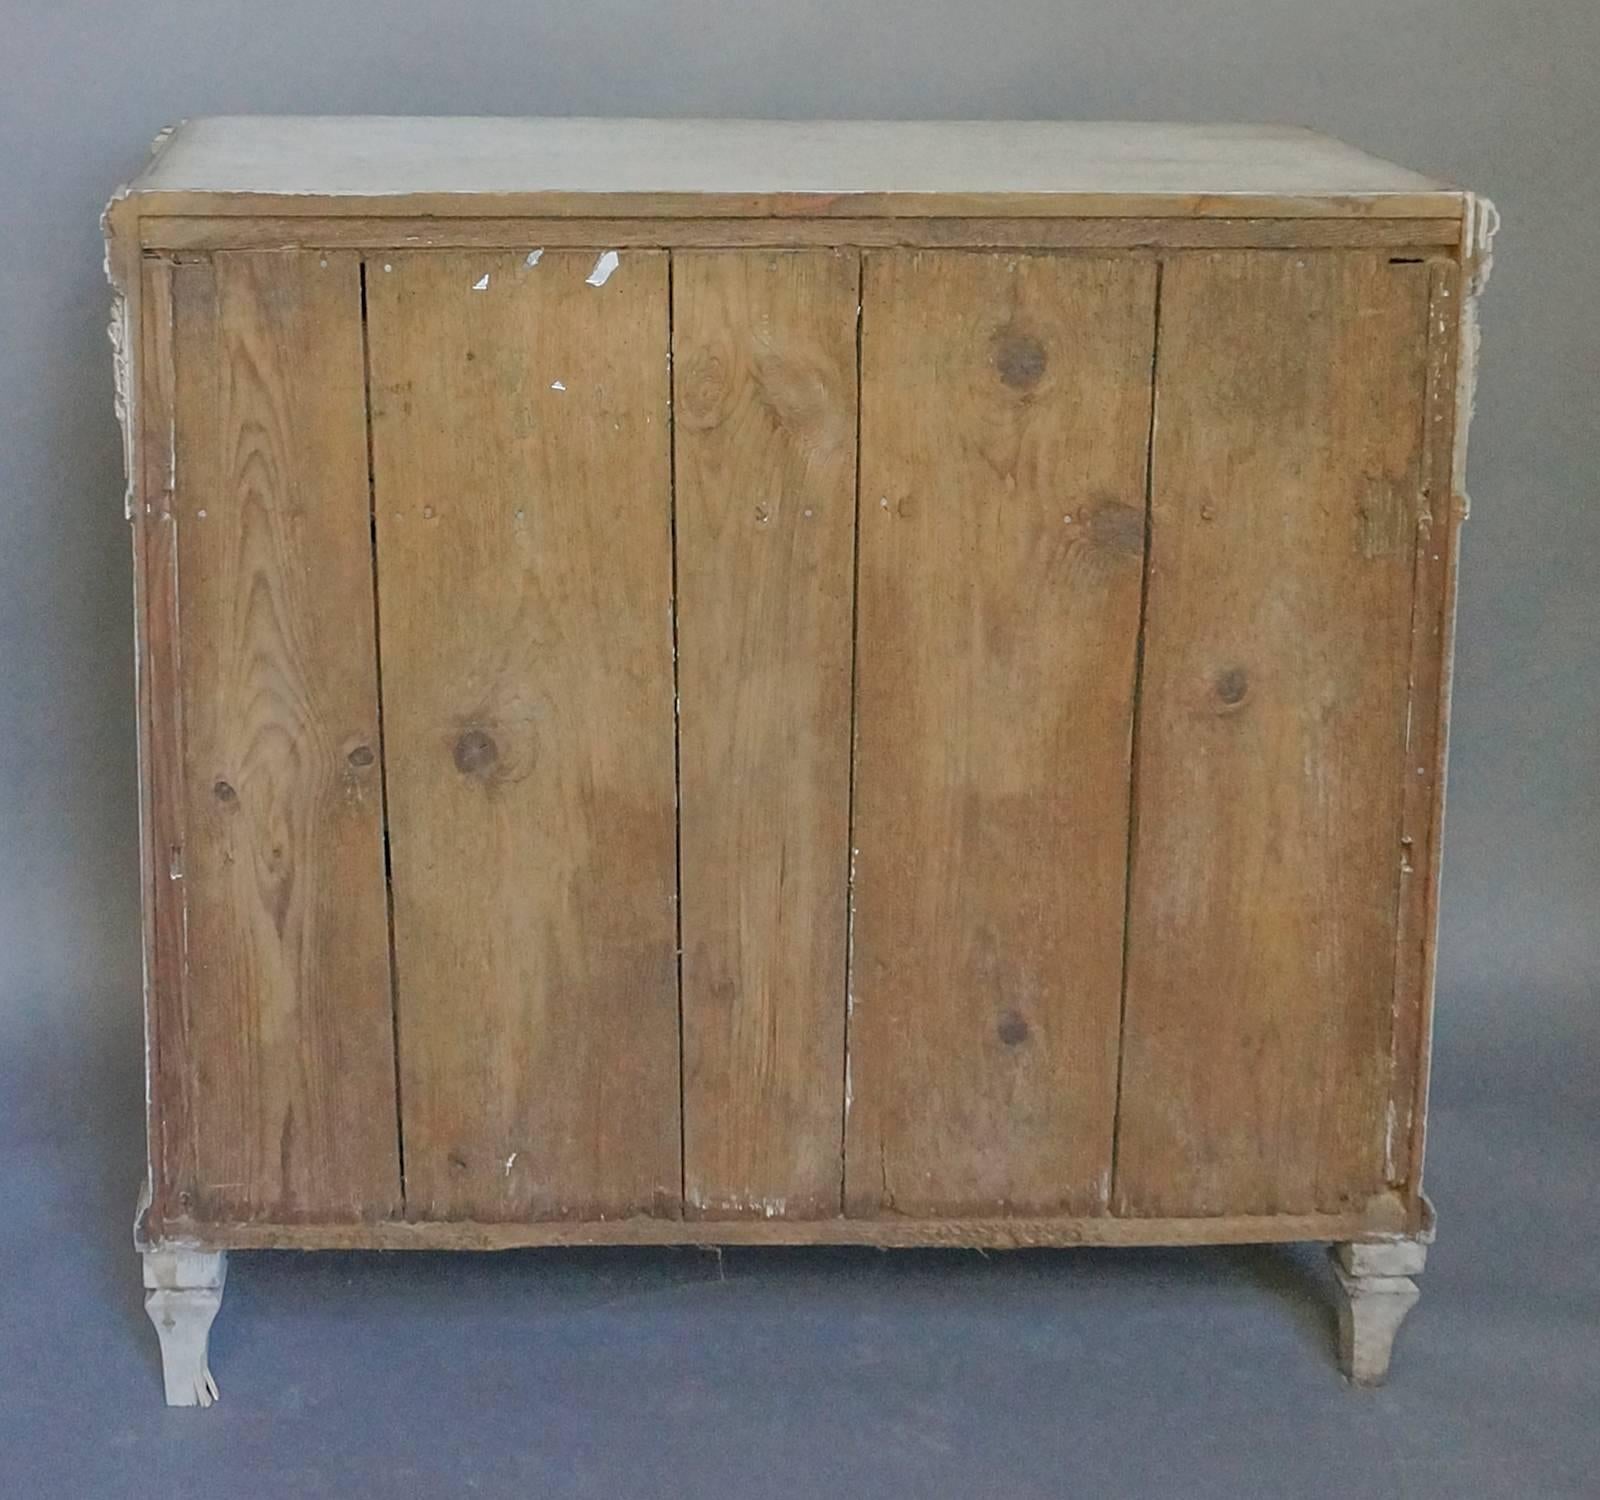 Wood Period Neoclassical Commode